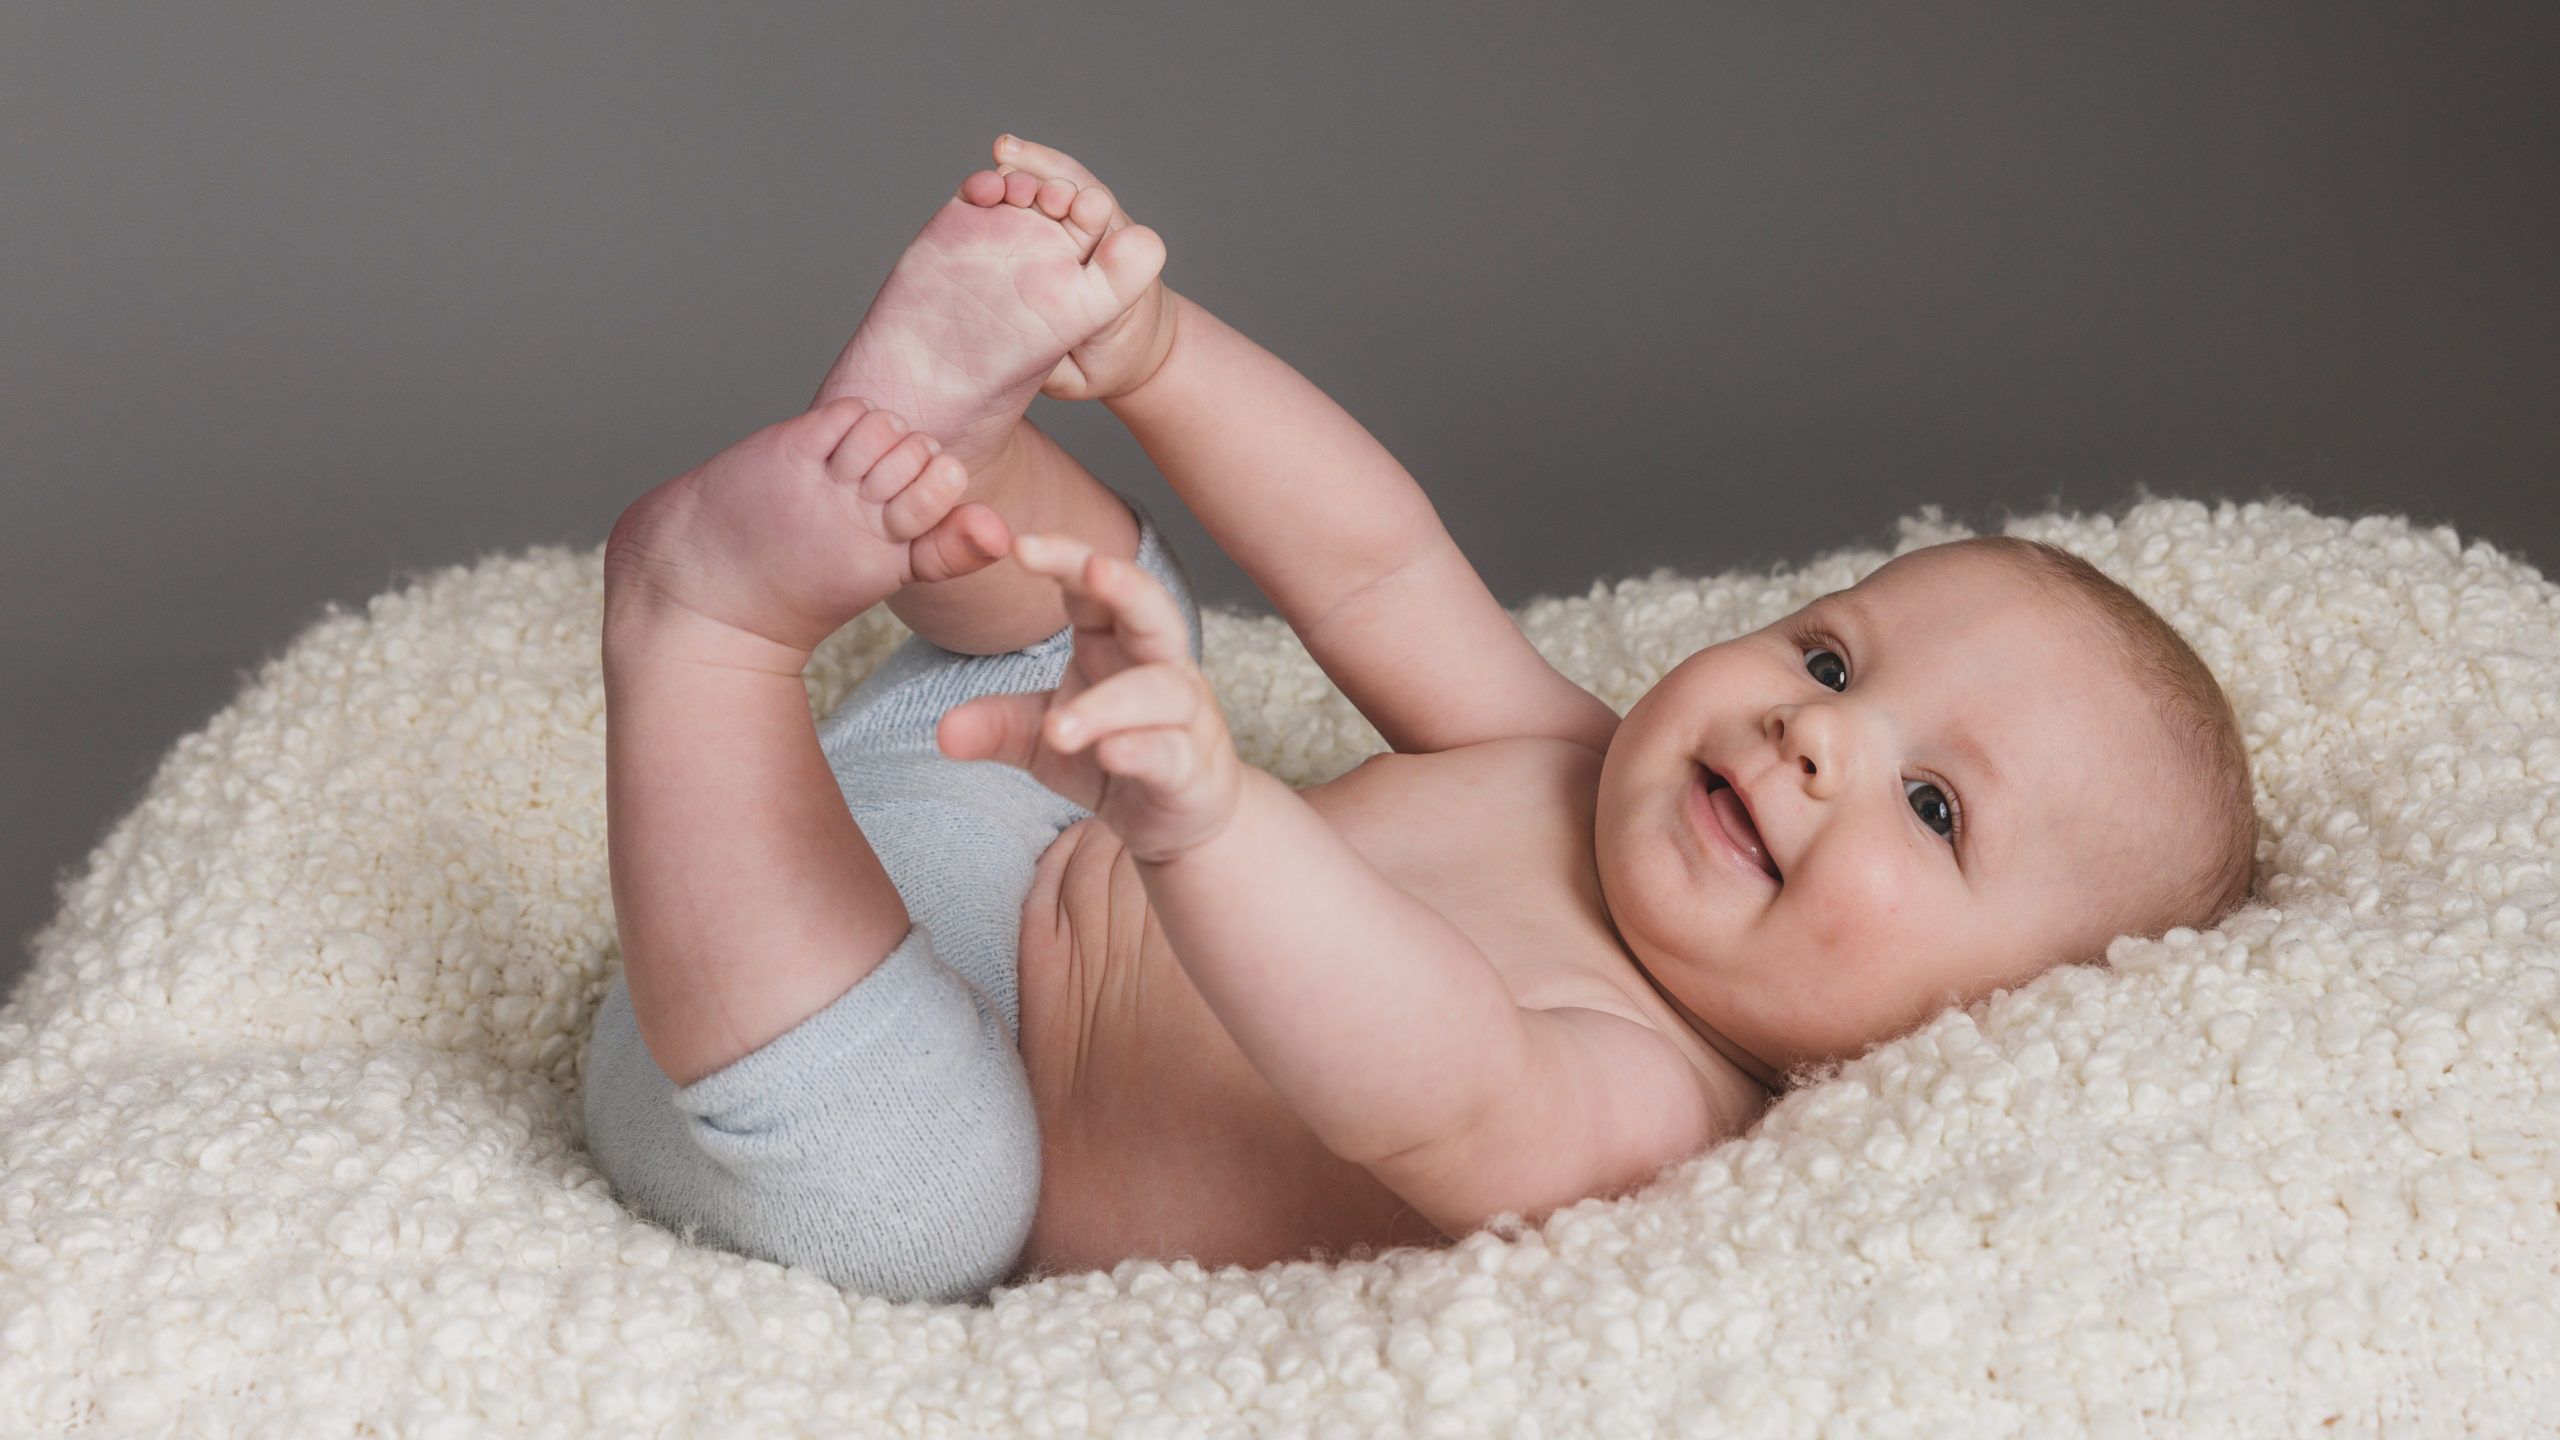 colour portrait of a 5 month baby lying on his back holding his feet a smiling at the camera